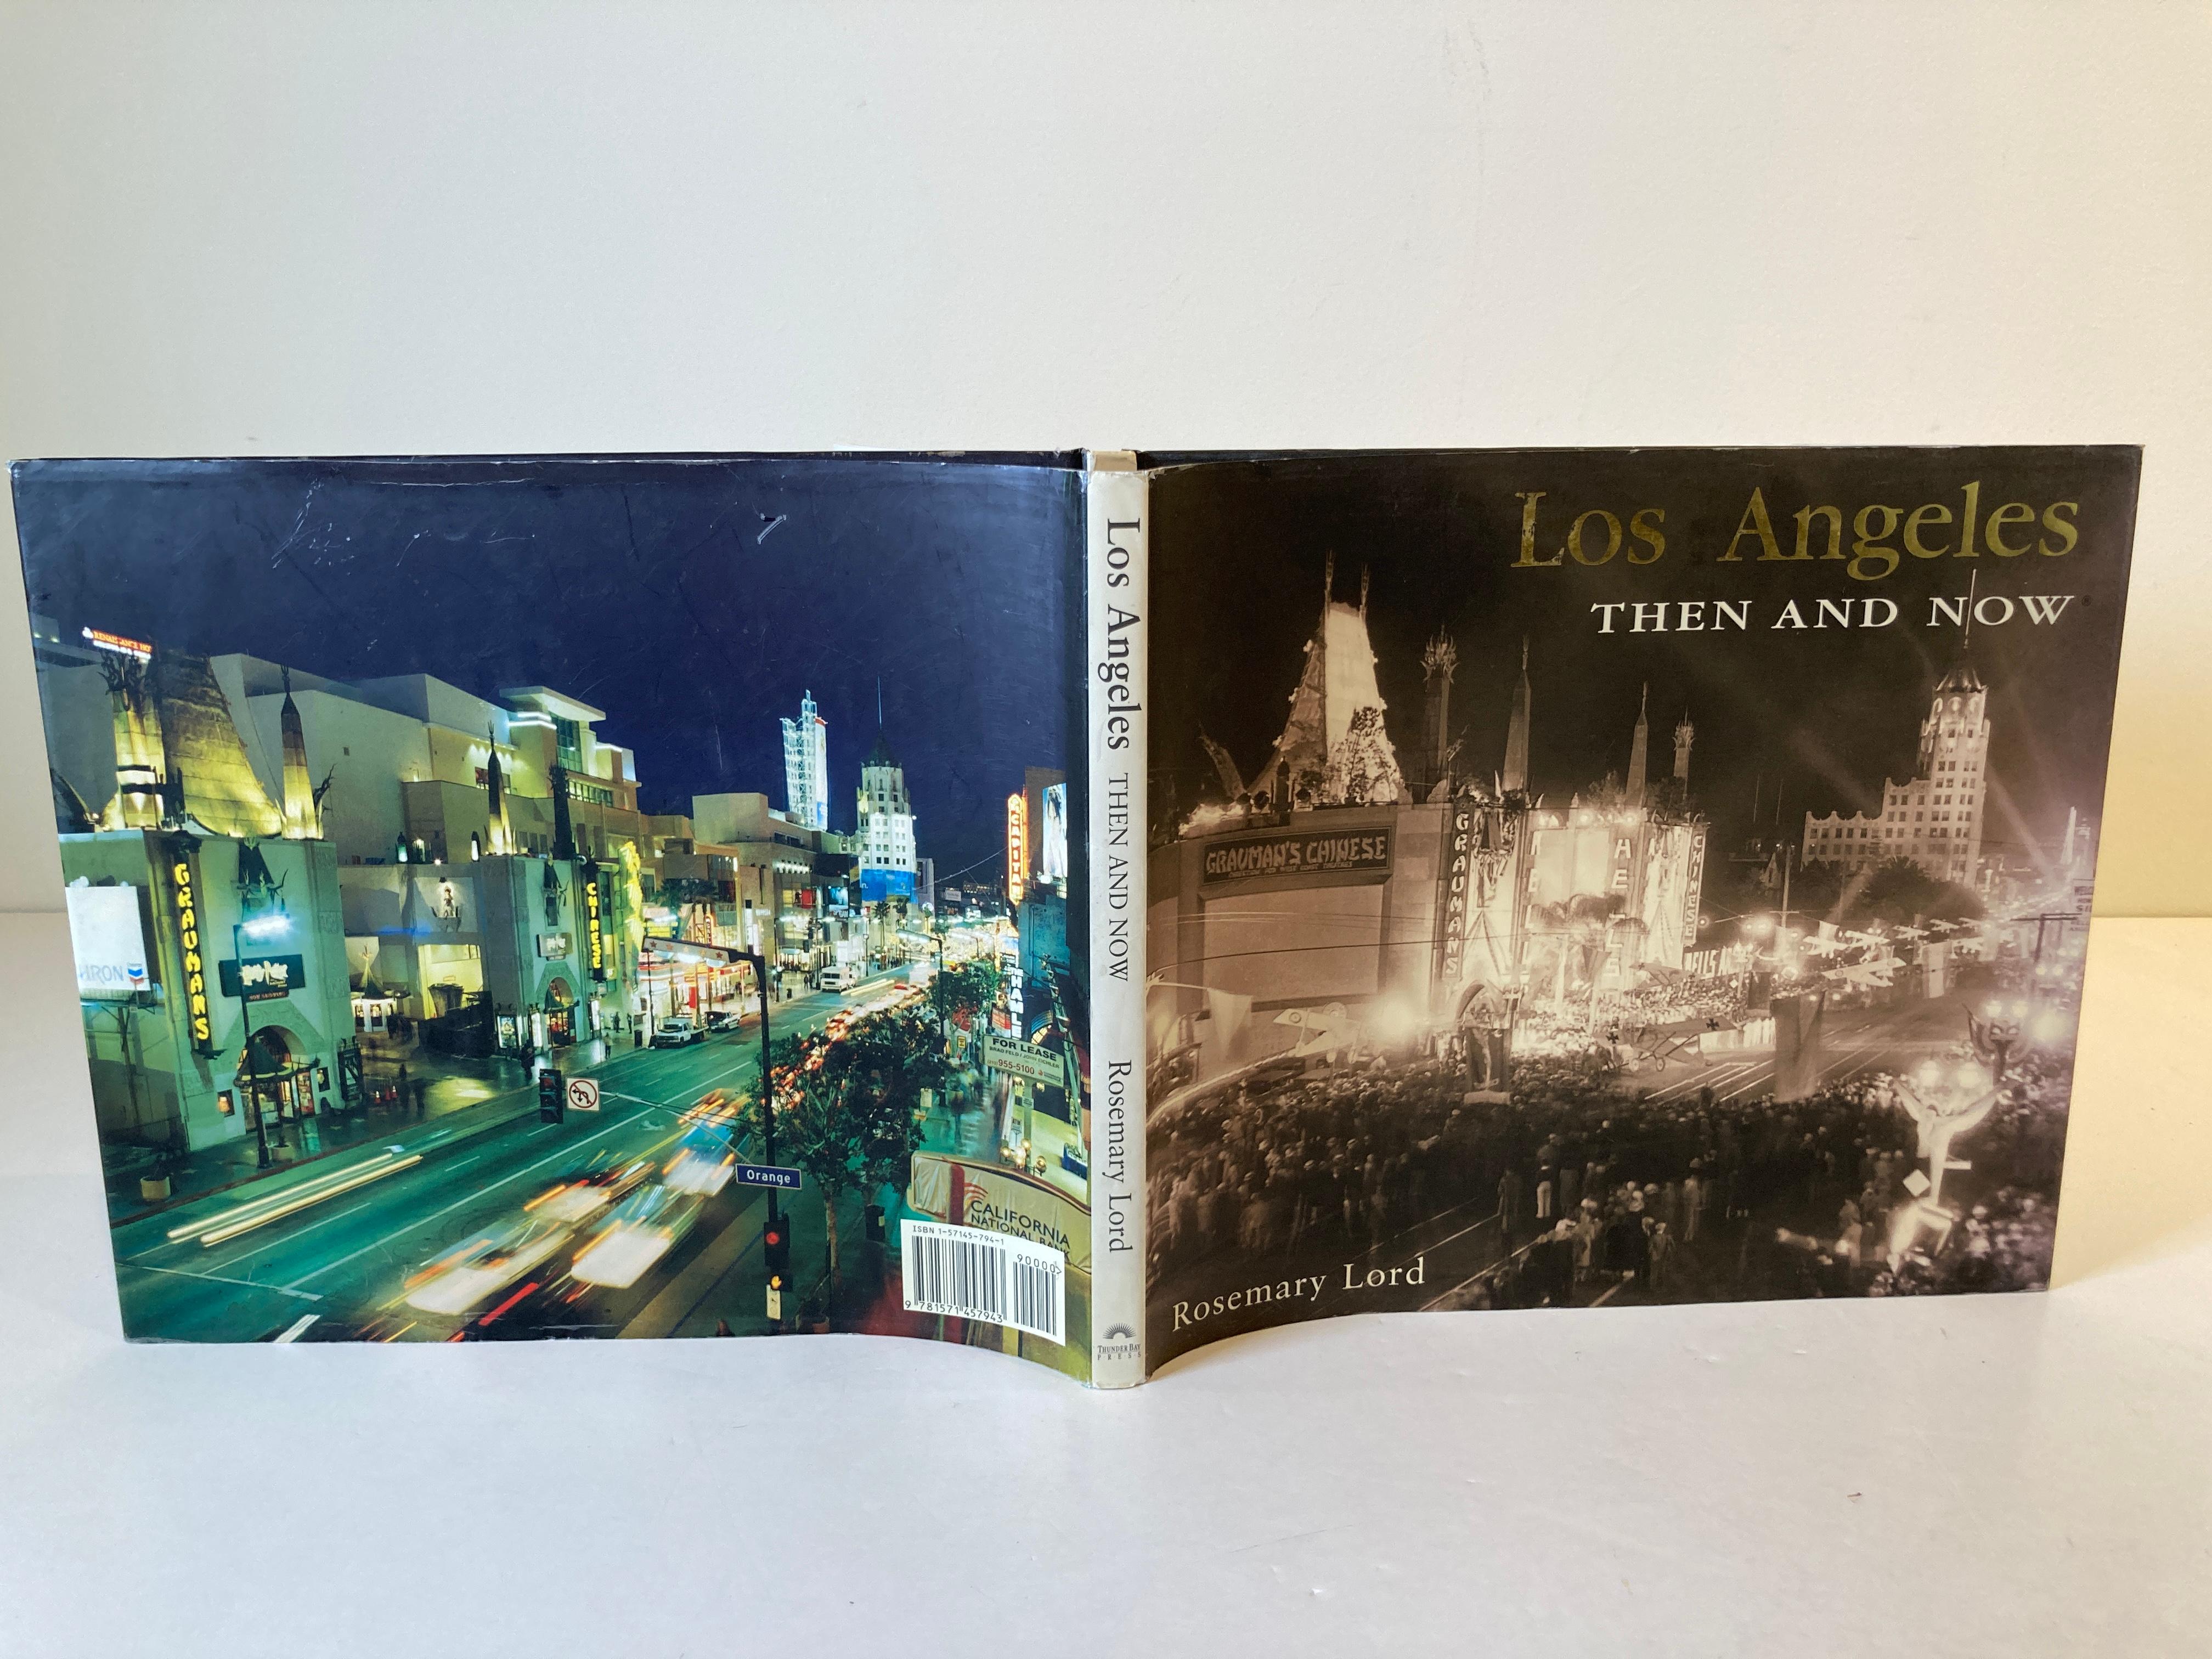 Los Angeles Then and Now by Rosemary Lord Book 8